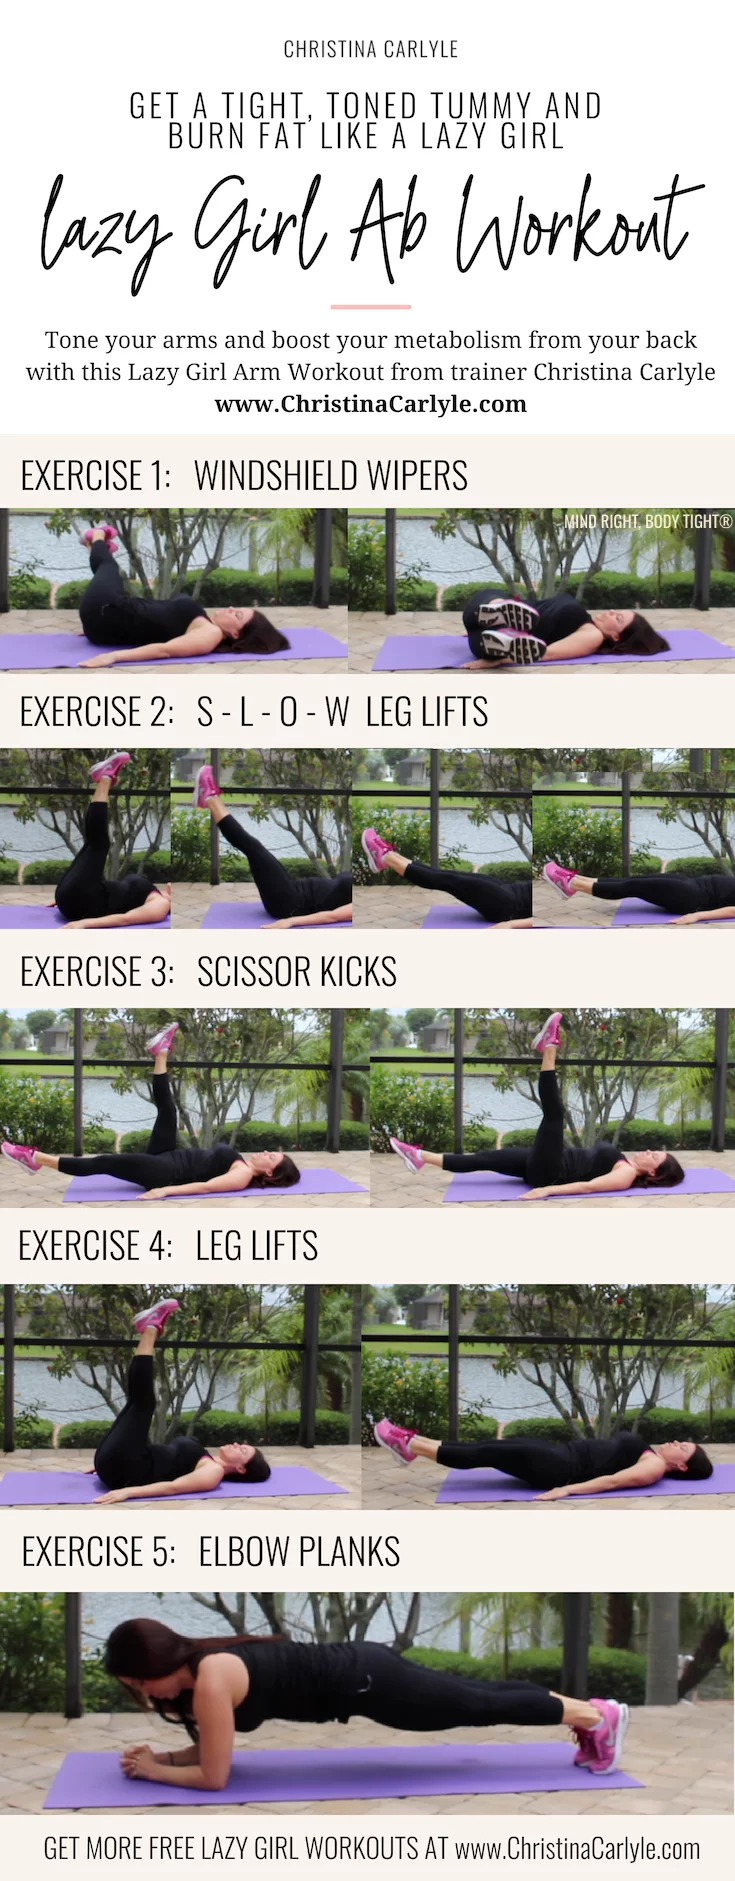 Get Abs the the Lazy Way with this Lazy Girl Ab Workout - Christina Carlyle